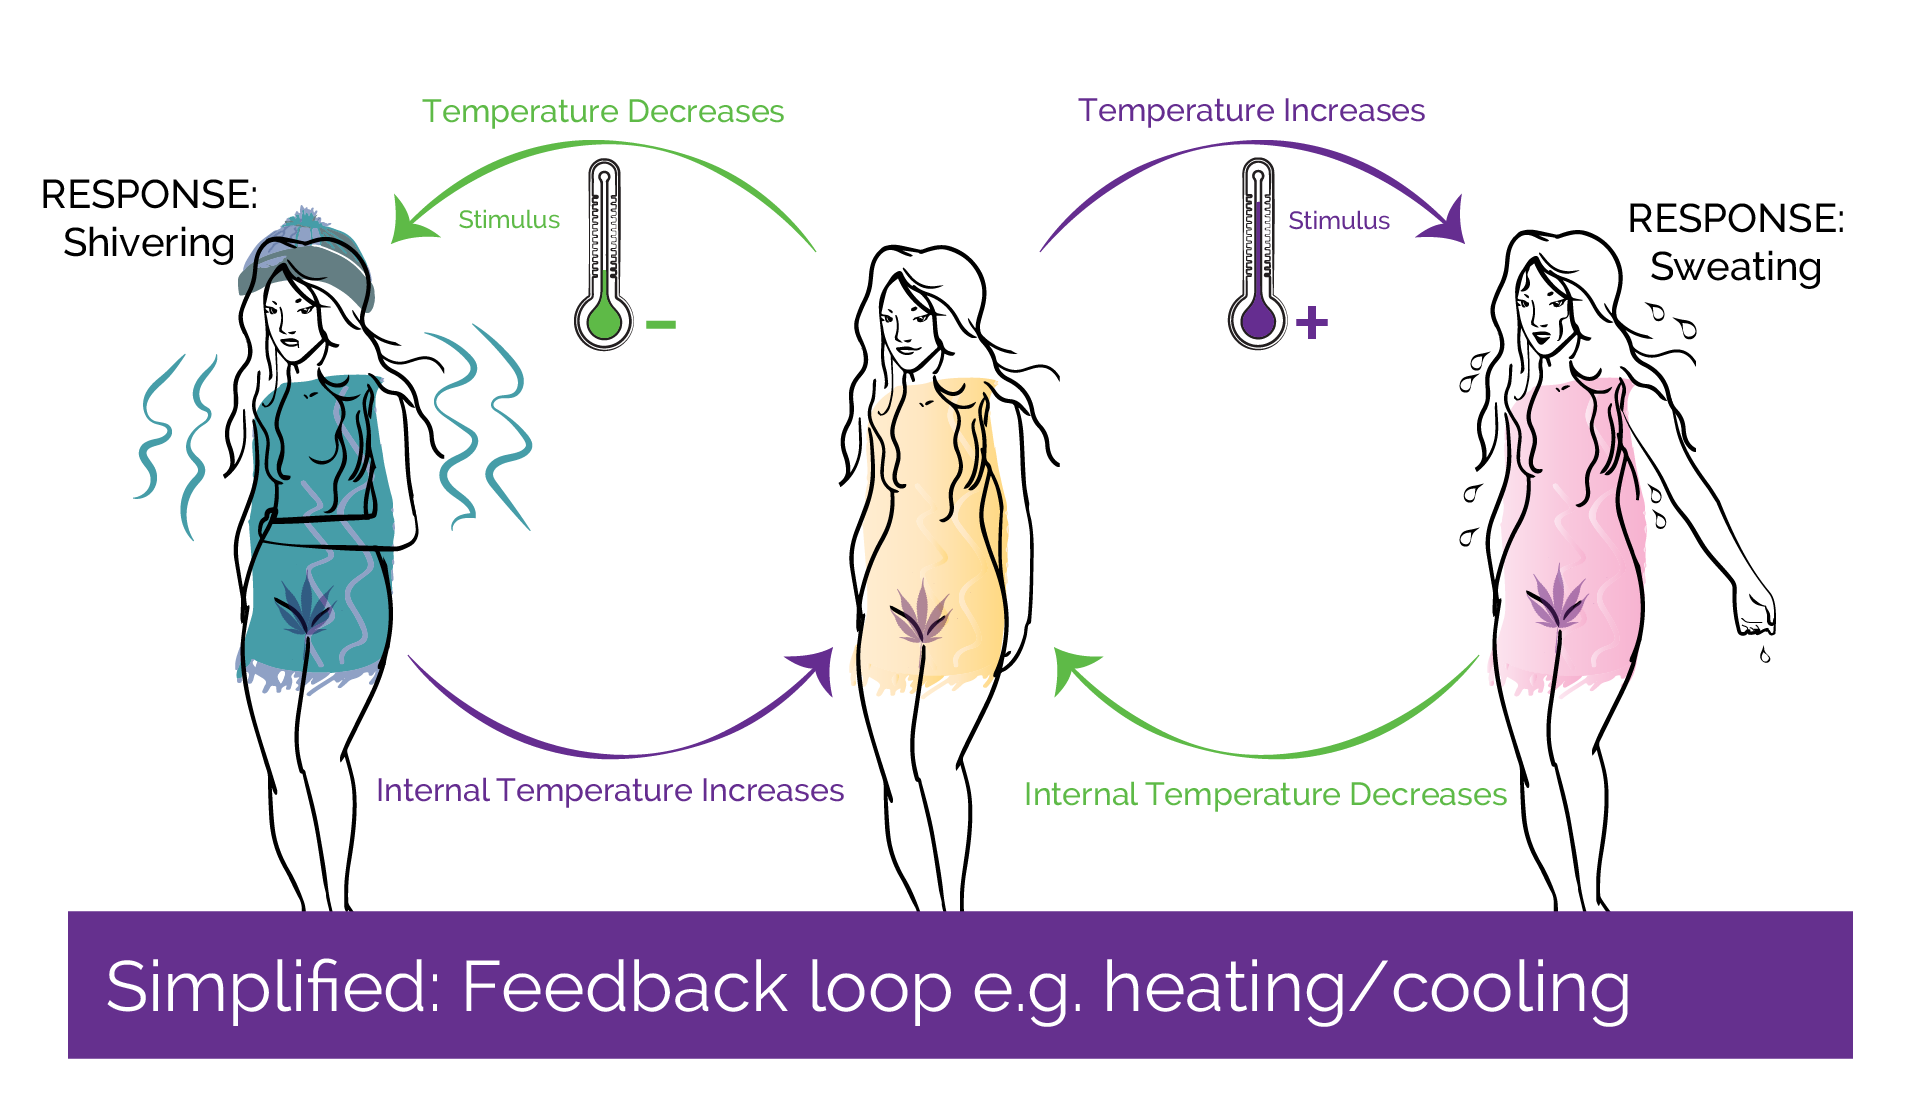 SImplified diagram demonstrating how a feedback loop operates using the example of heat - sweating and shivering - cooling